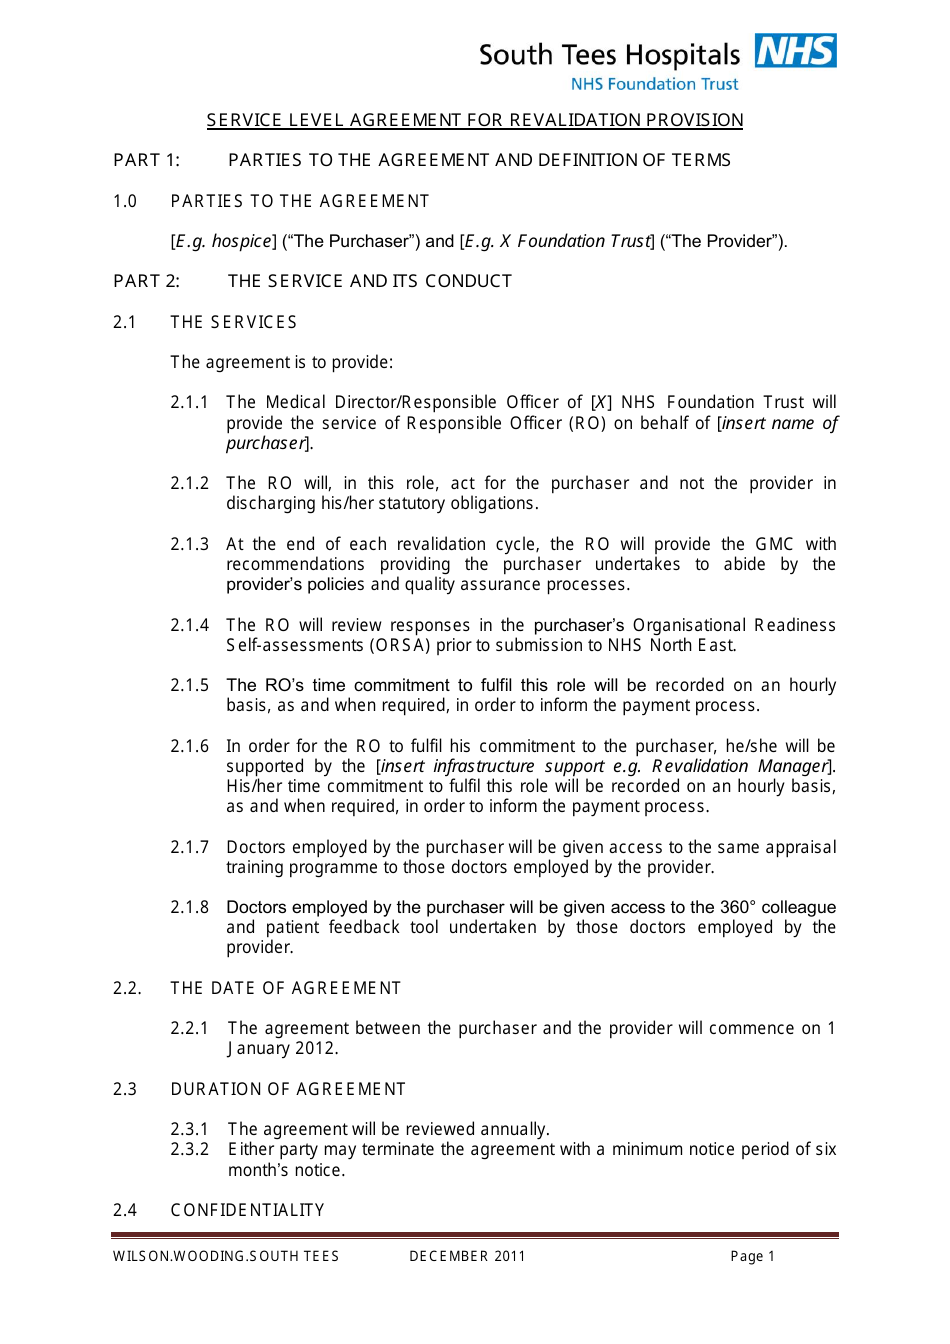 Service Level Agreement for Revalidation Provision - South Tees Hospitals - Nhs Foundation Trust - United Kingdom, Page 1